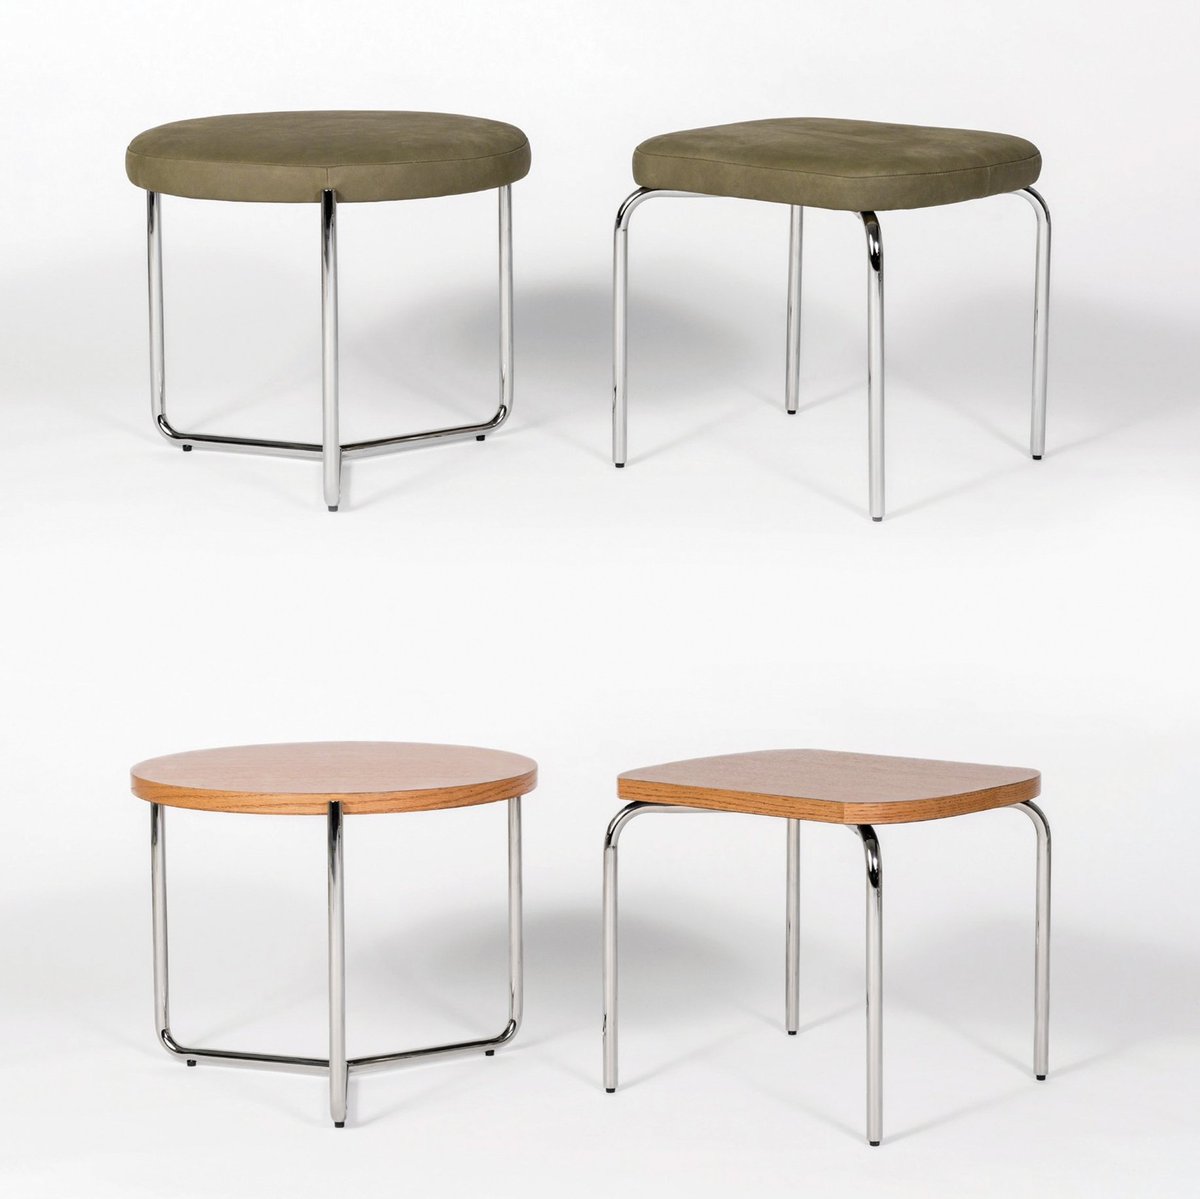 Introducing the Peek & Trilogy Collection by Timothy deFiebre for Jamie Stern.

Learn more about Peek & Trilogy Collection here hubs.li/Q02sBR6T0

#jamiesterndesign #peektrilogy #stooldesign #design #barstools #designerfurniture #furniturecollection #interiordesign